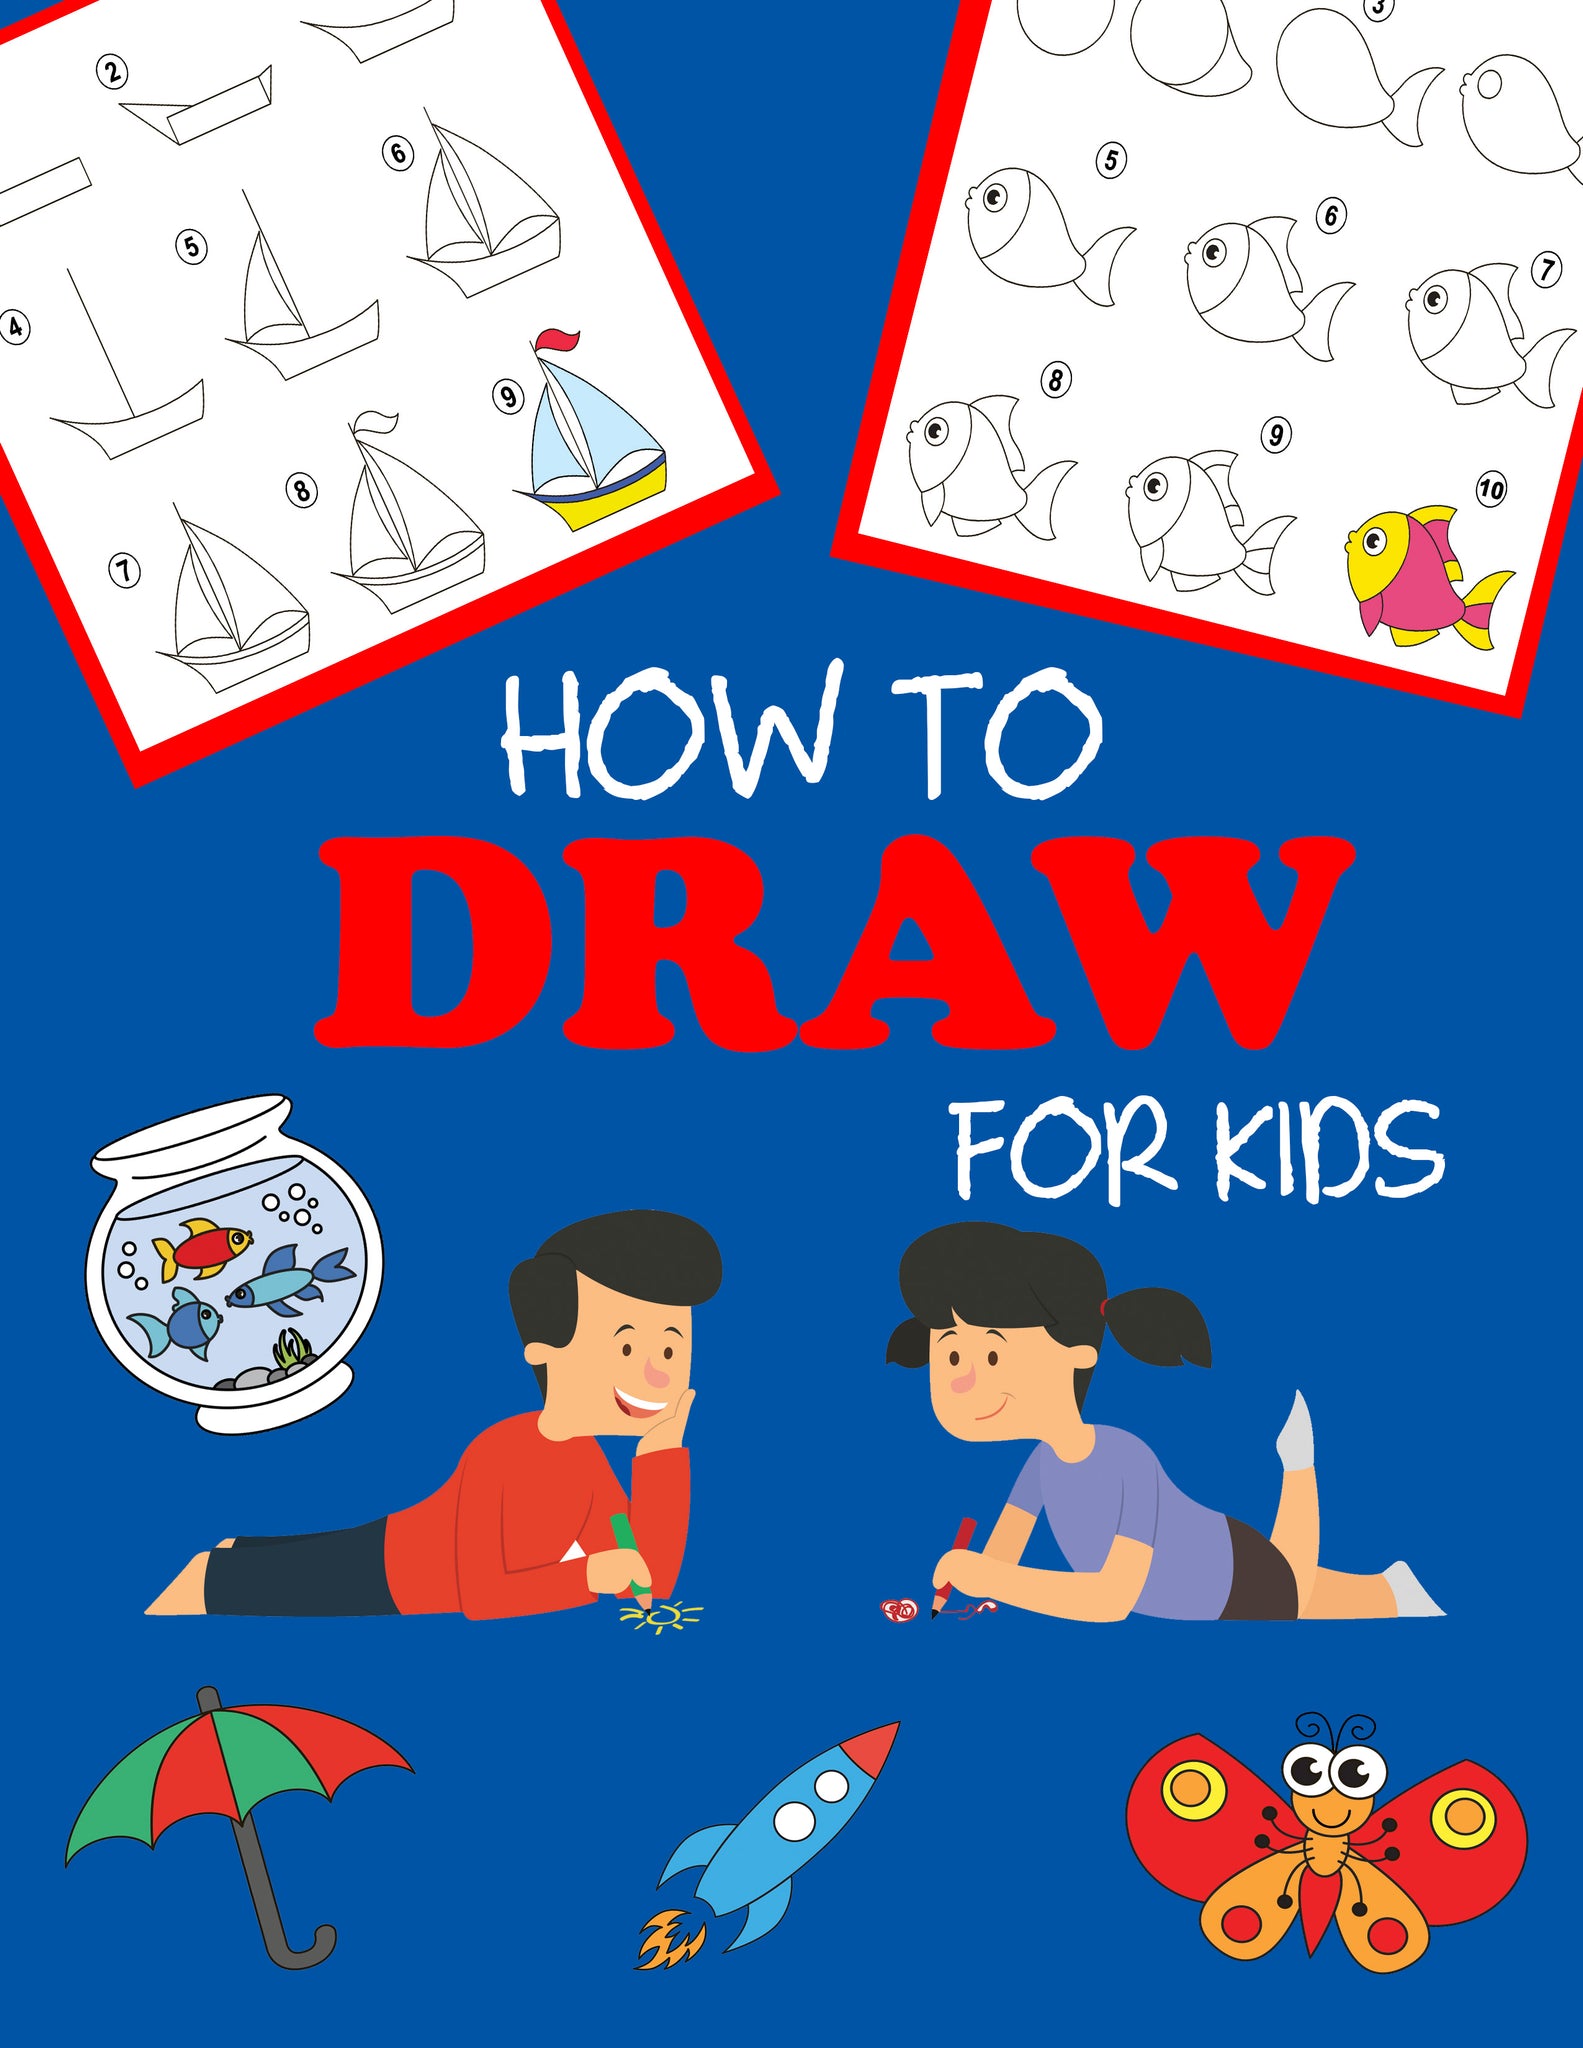 How to Draw for Kids (Step-By-Step Drawing Books)